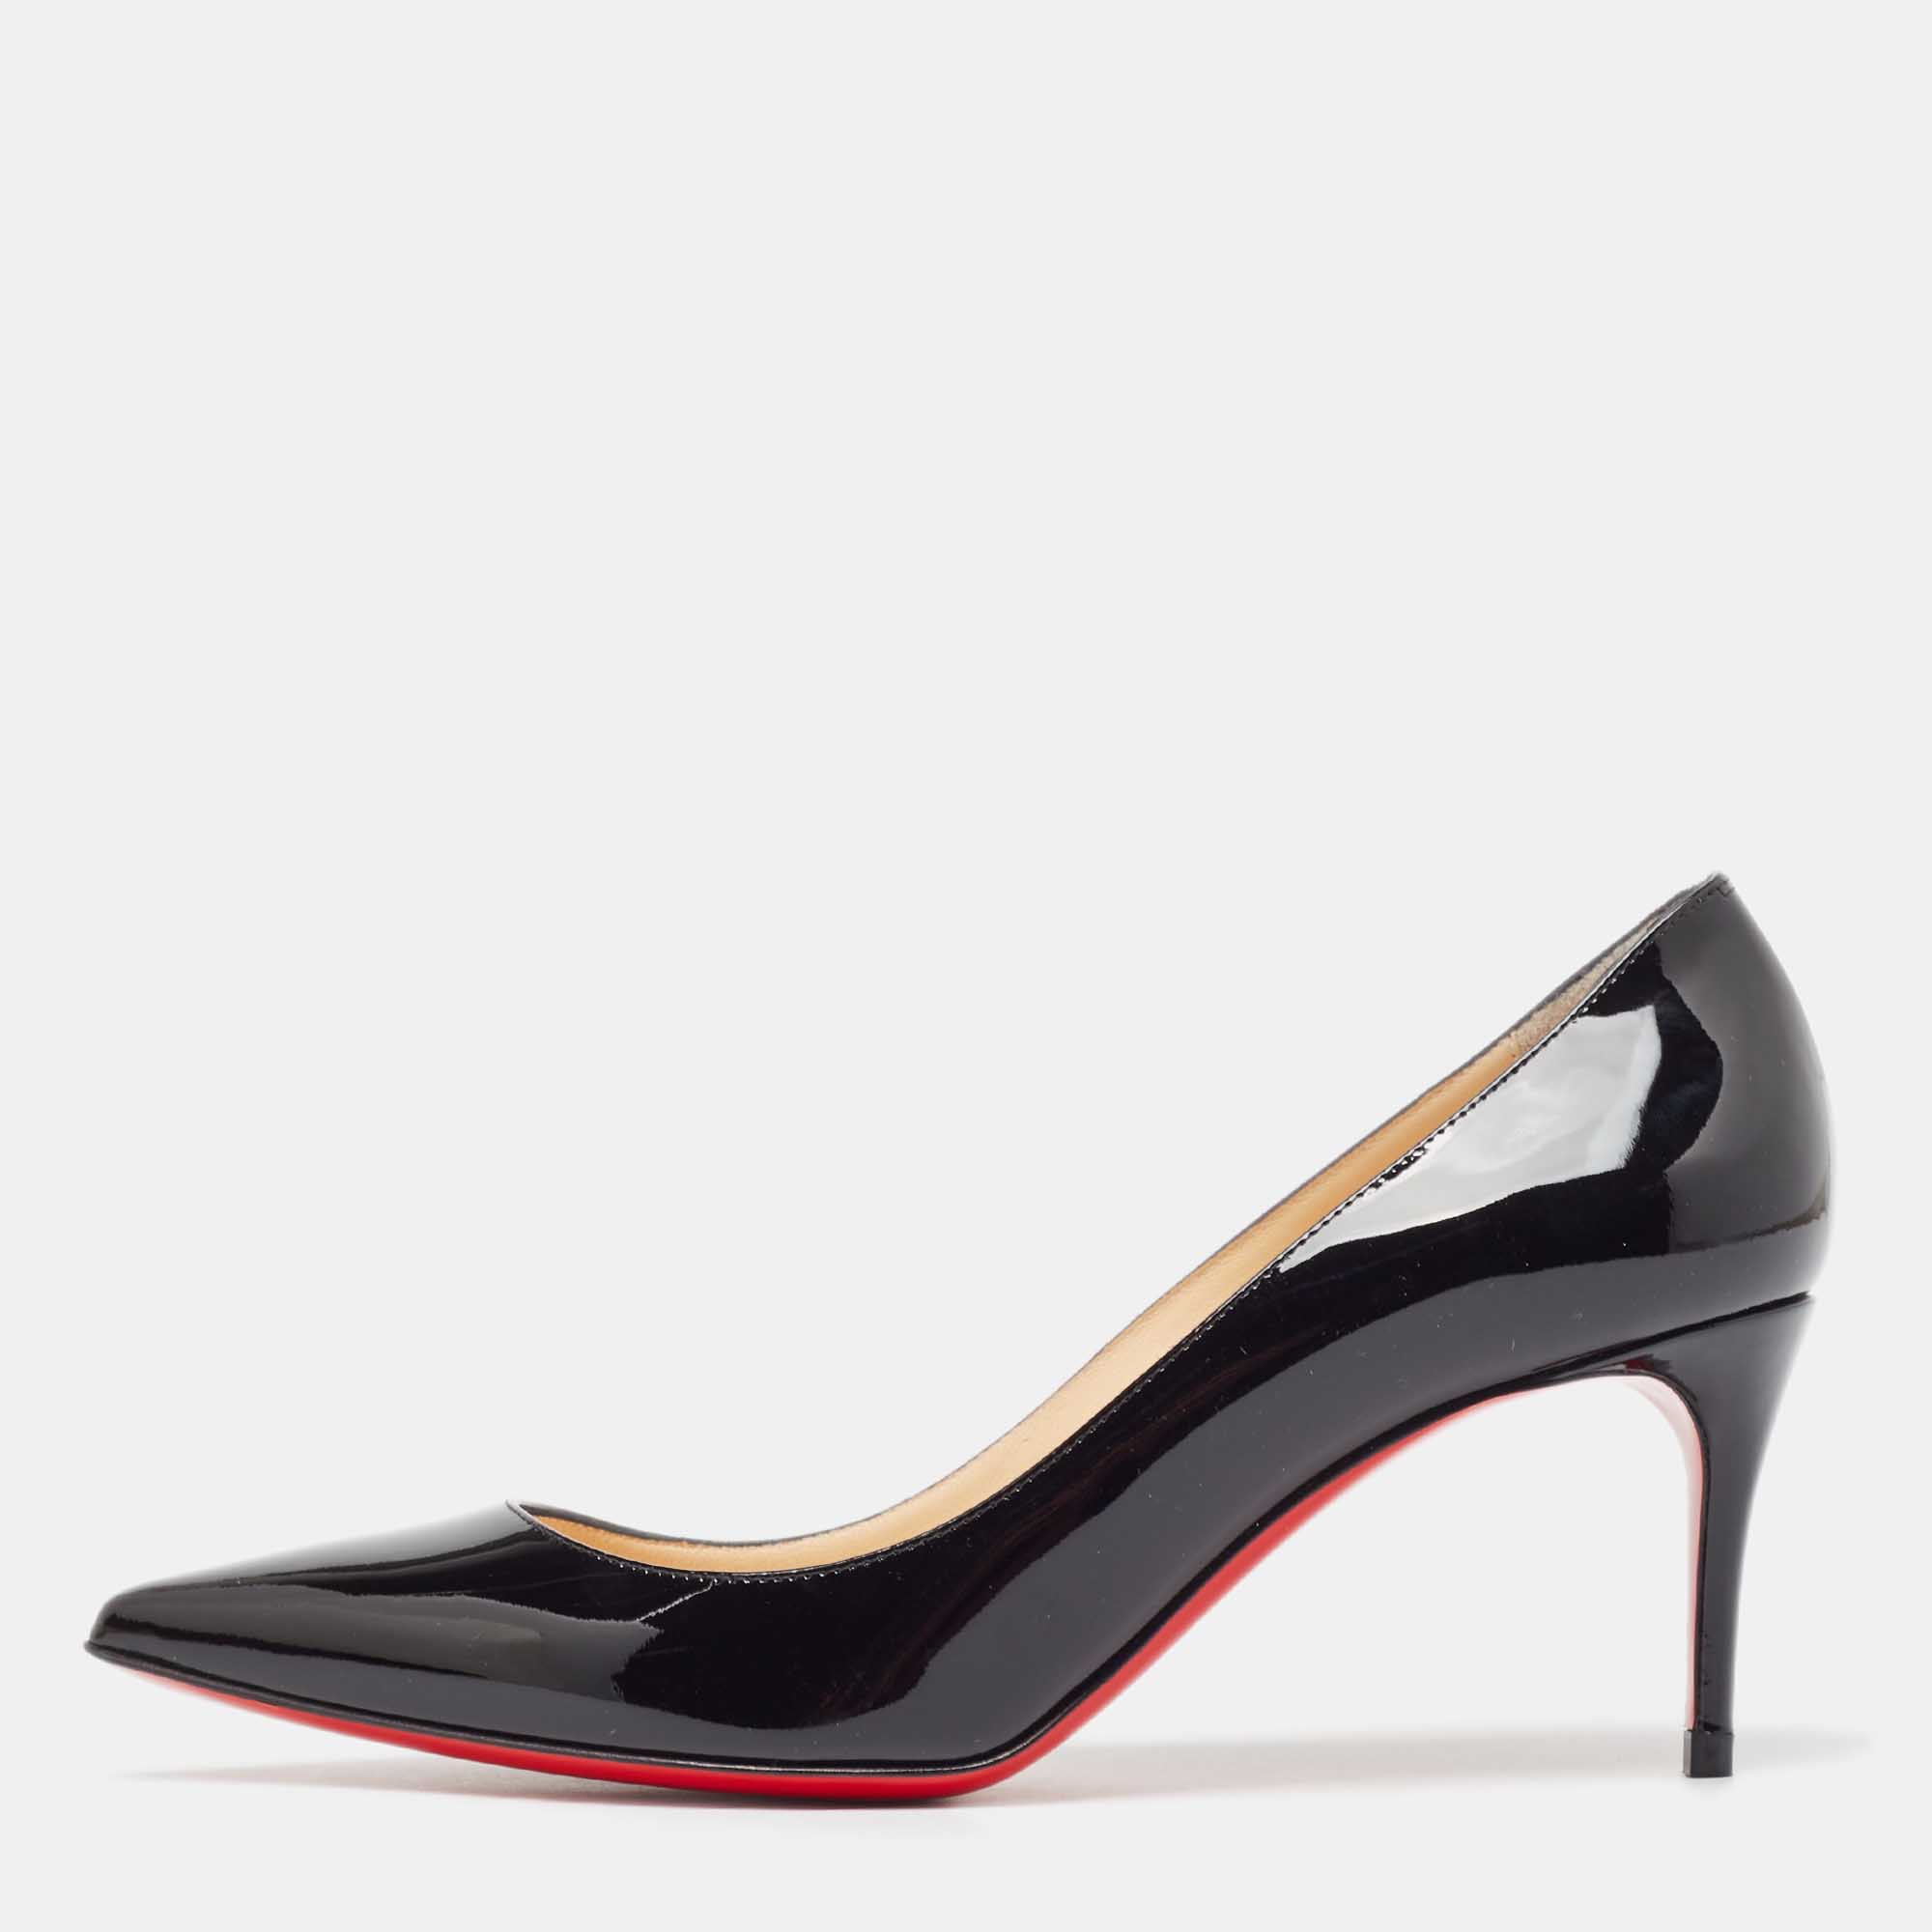 Pre-owned Christian Louboutin Black Patent Leather Kate Pumps Size 35.5